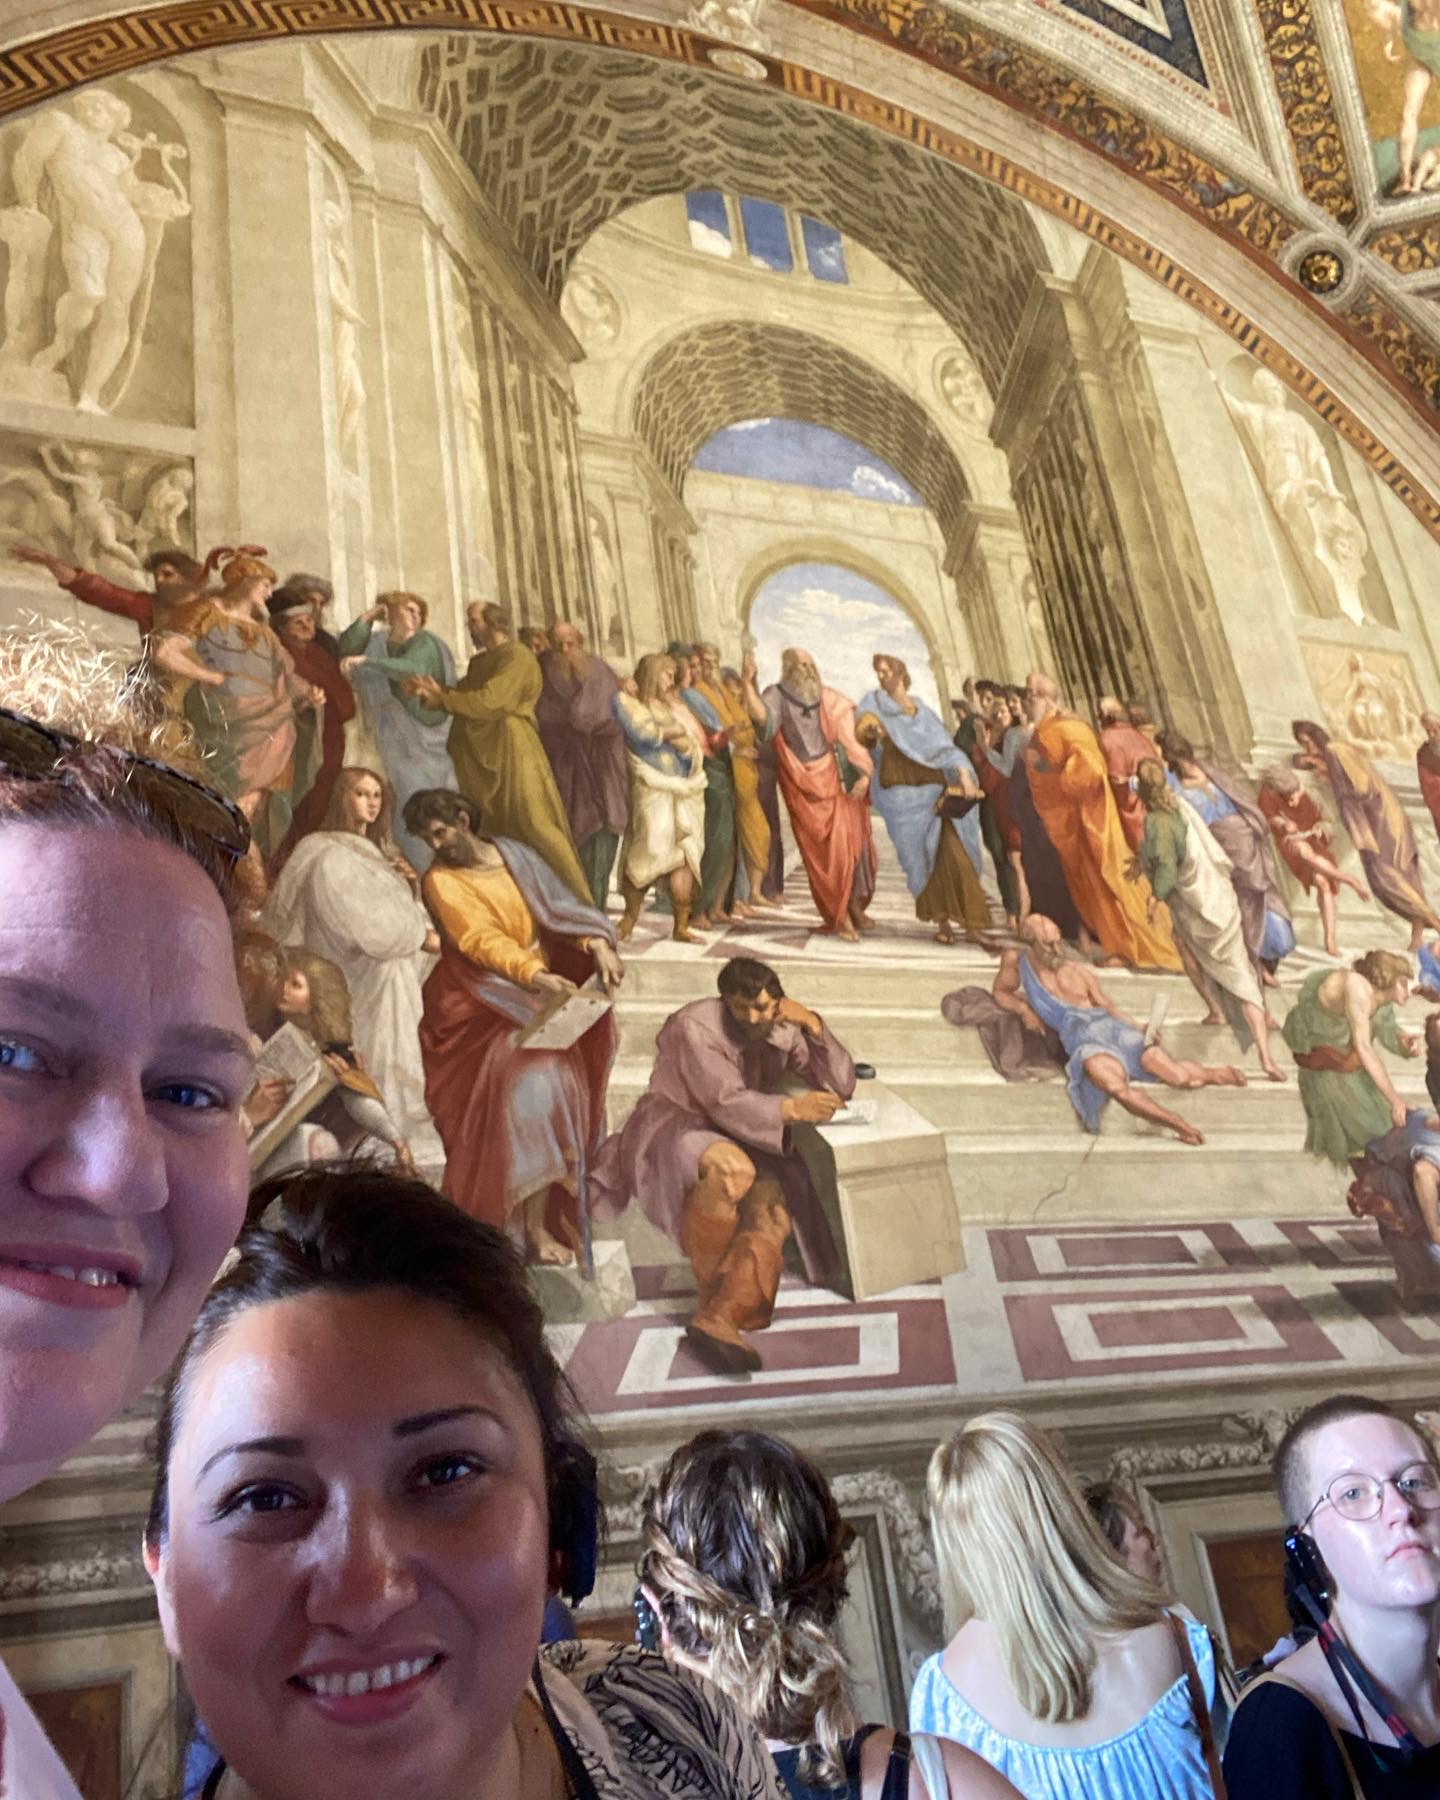 viewing Renaissance Italian frescoes during study abroad